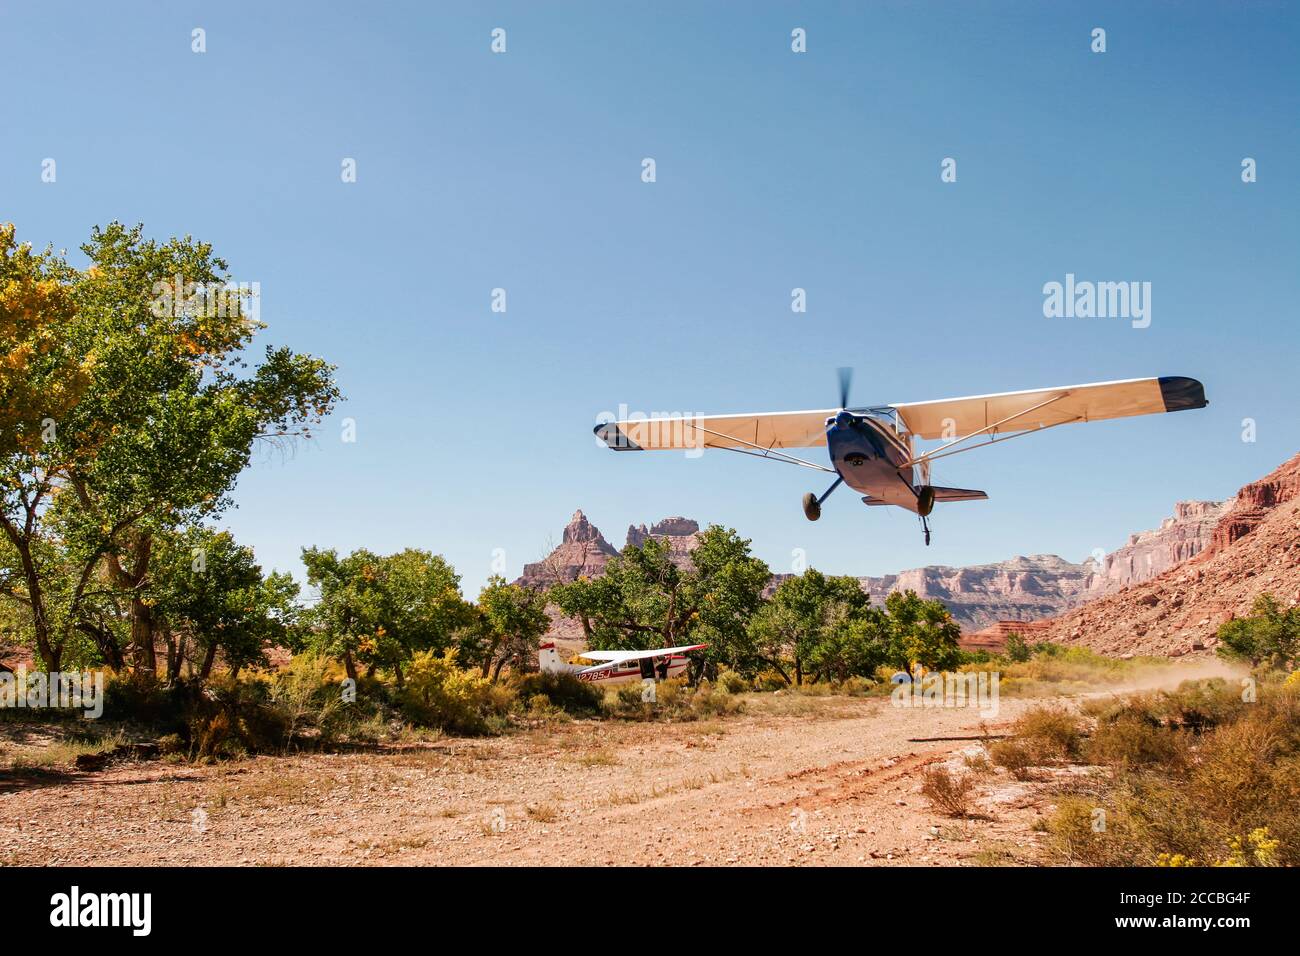 A experimental kit plane takes off from  the remote Mexican Mountain airstrip on the San Rafael Swell in Utah.  A Cessna 185 Skywagon is parked by the Stock Photo